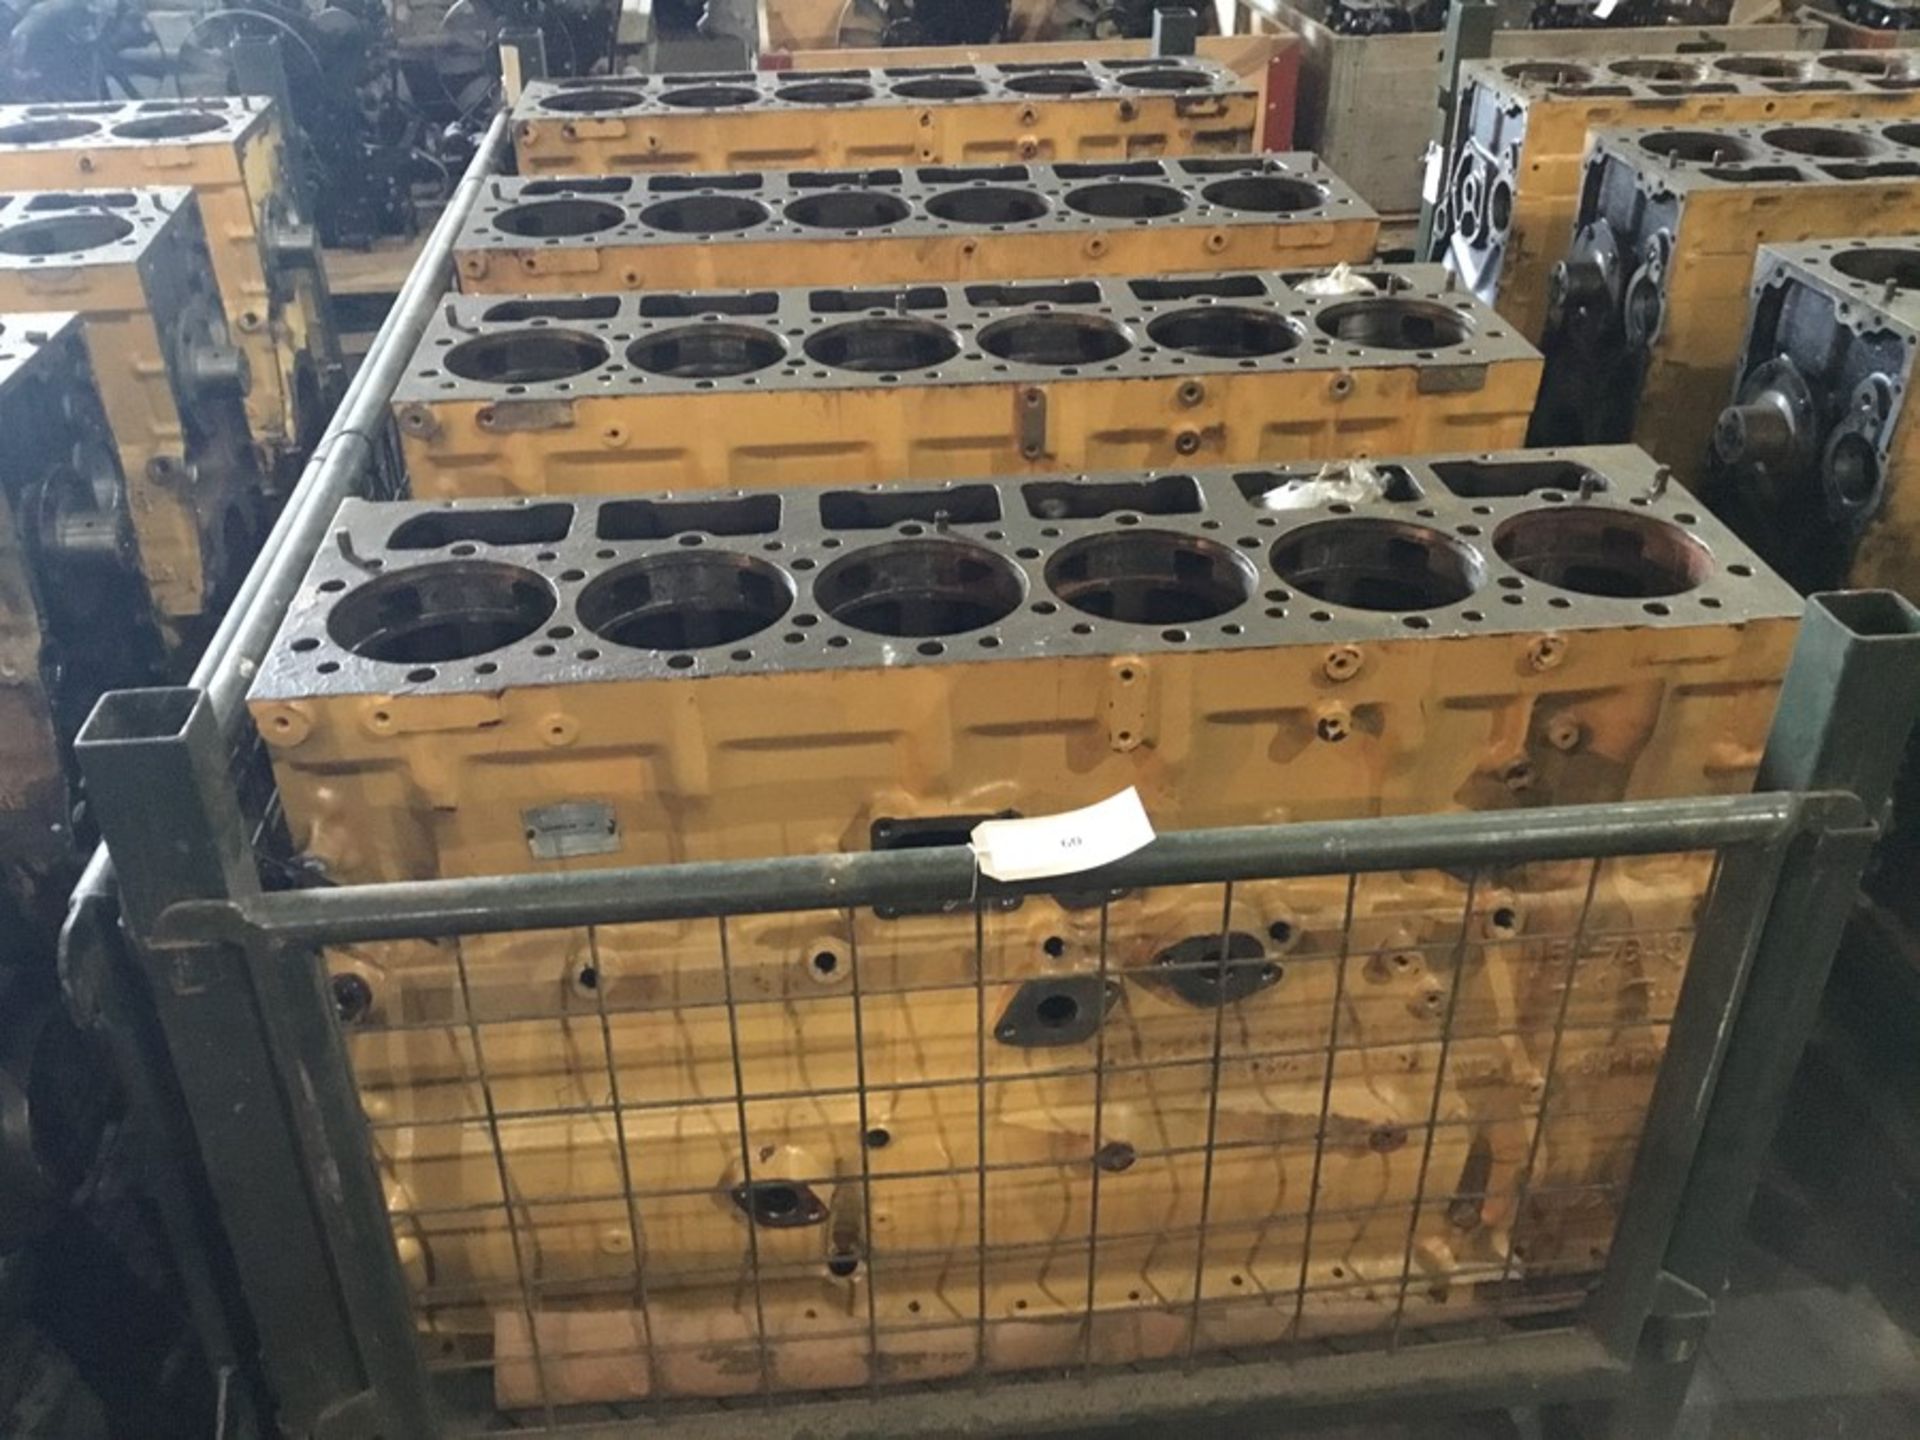 Stillage containing qty 4 Caterpillar 3406E 6cyl Bare block Serial 1DZ05208, Serial 1DZ05757 2 block - Image 2 of 9